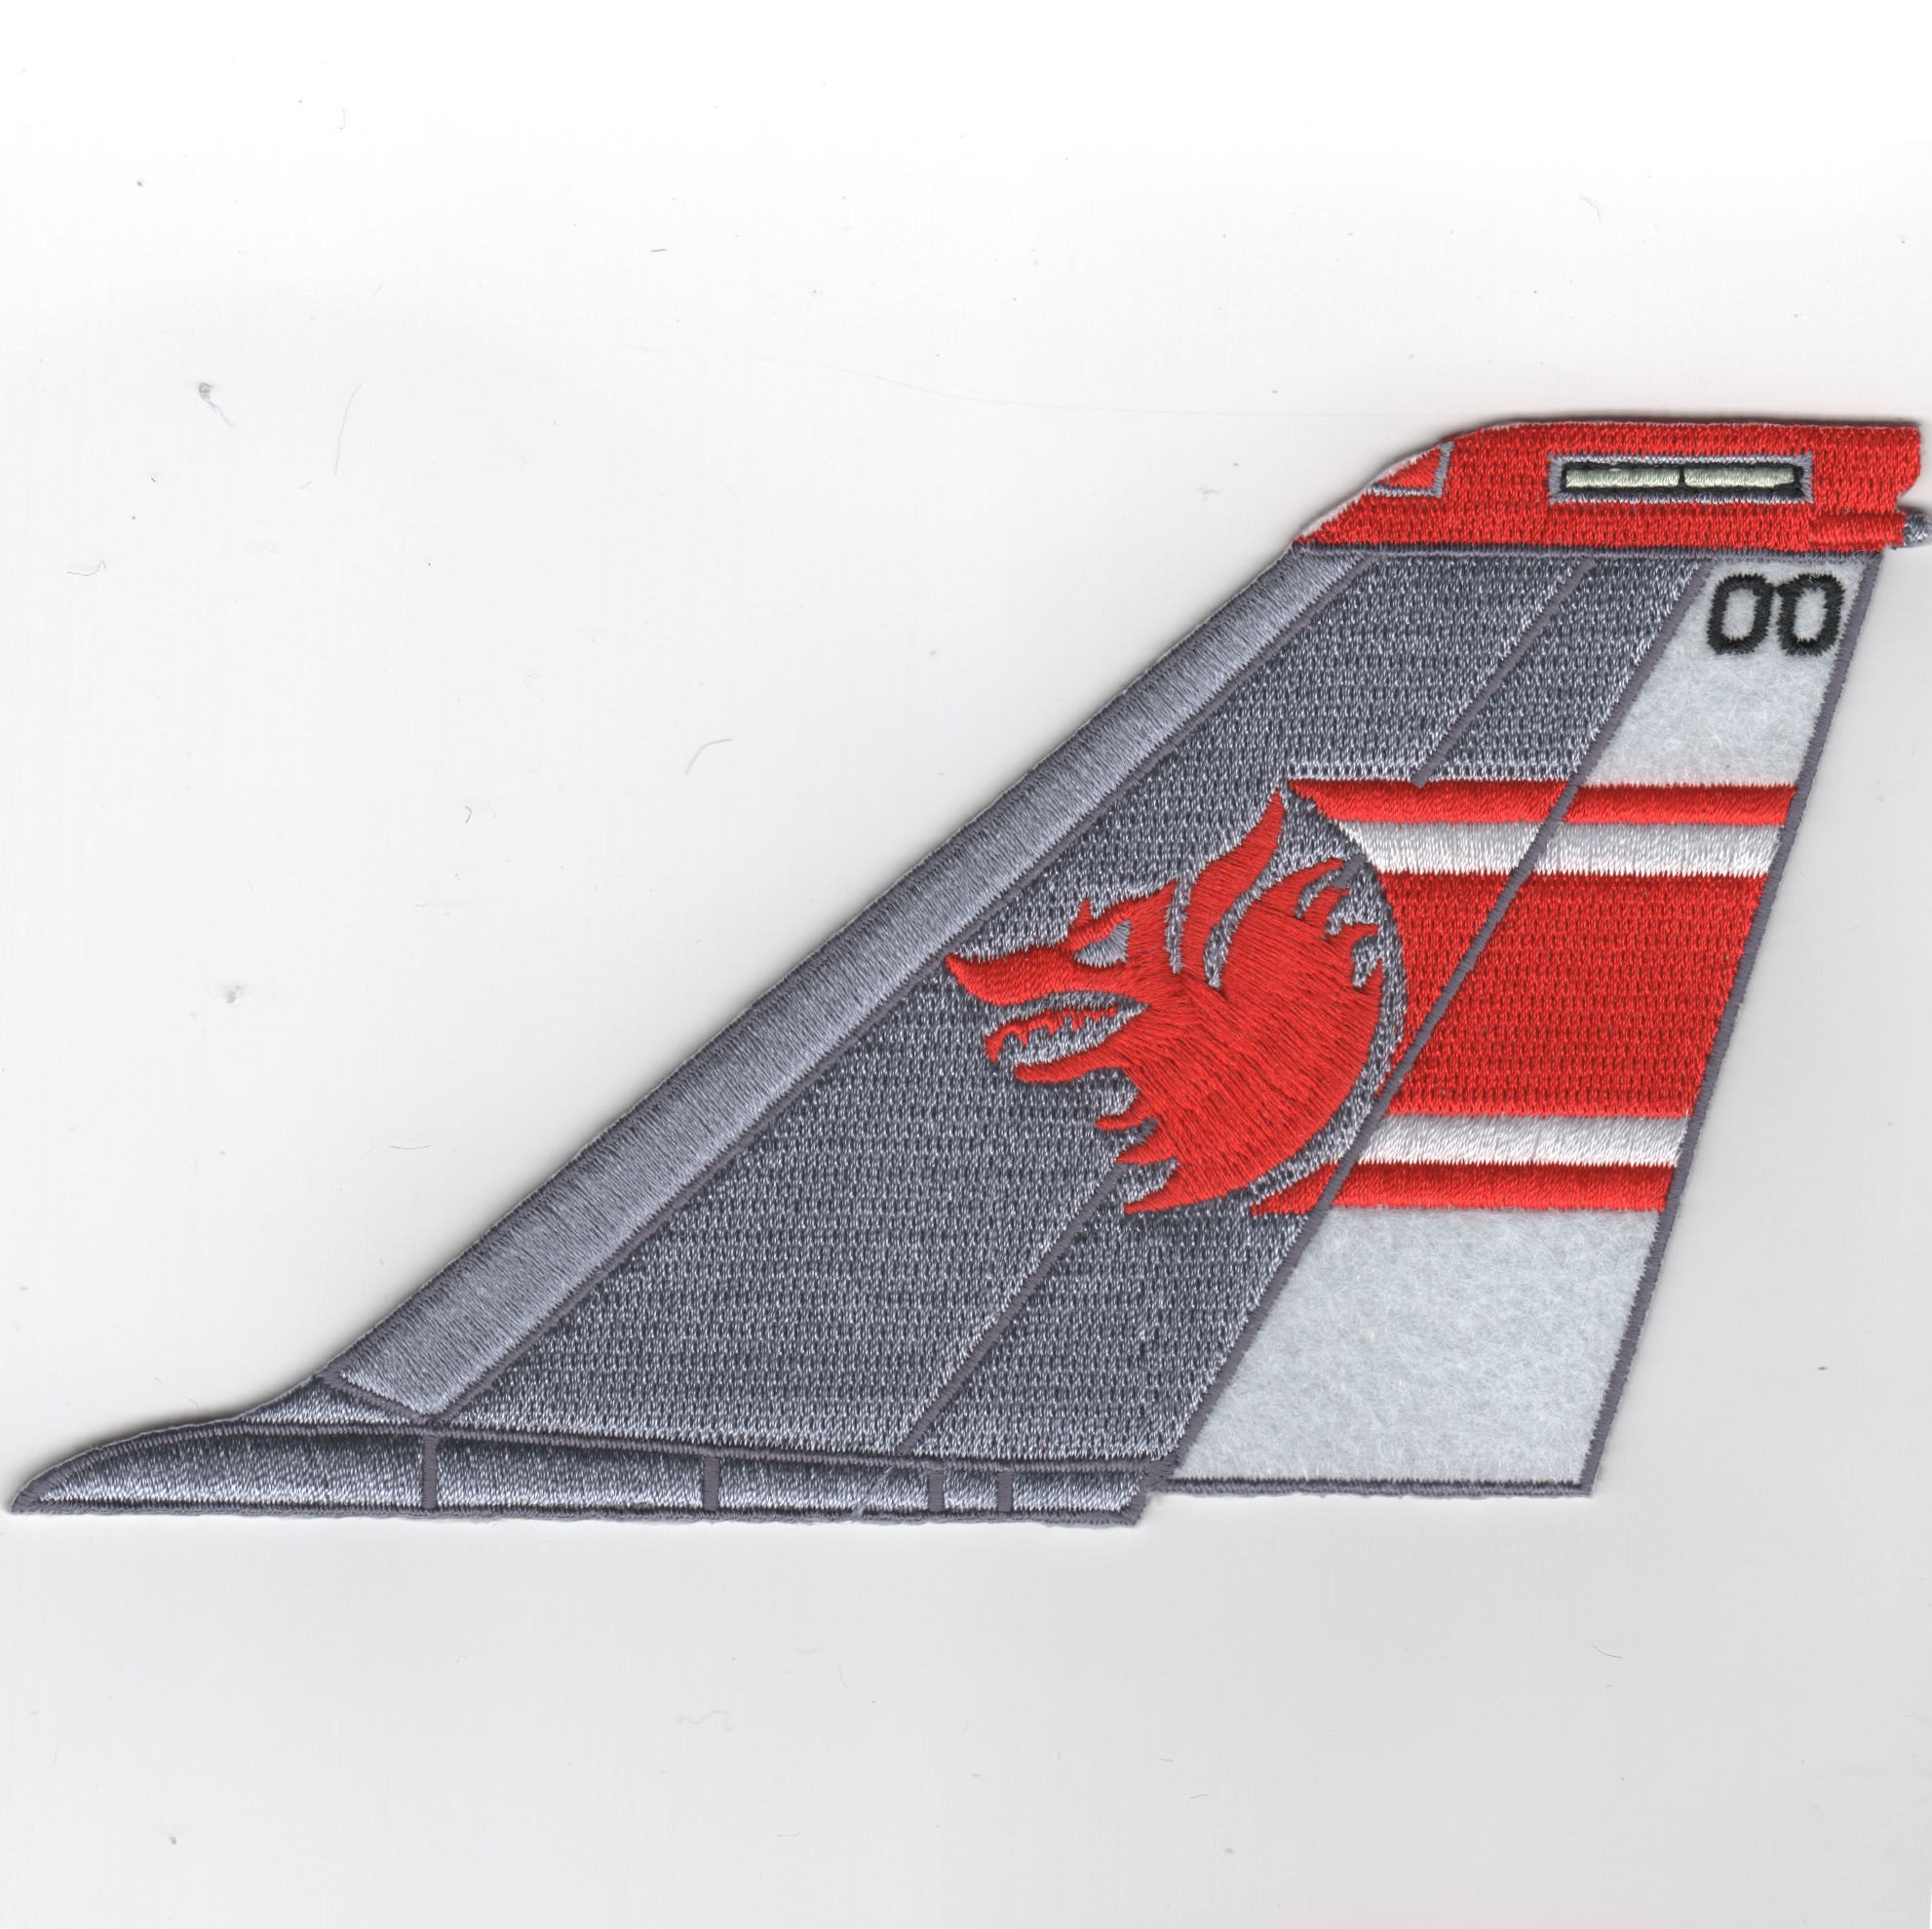 VF-1 F-14 Tomcat Tail Fin (Red/White/No Text)